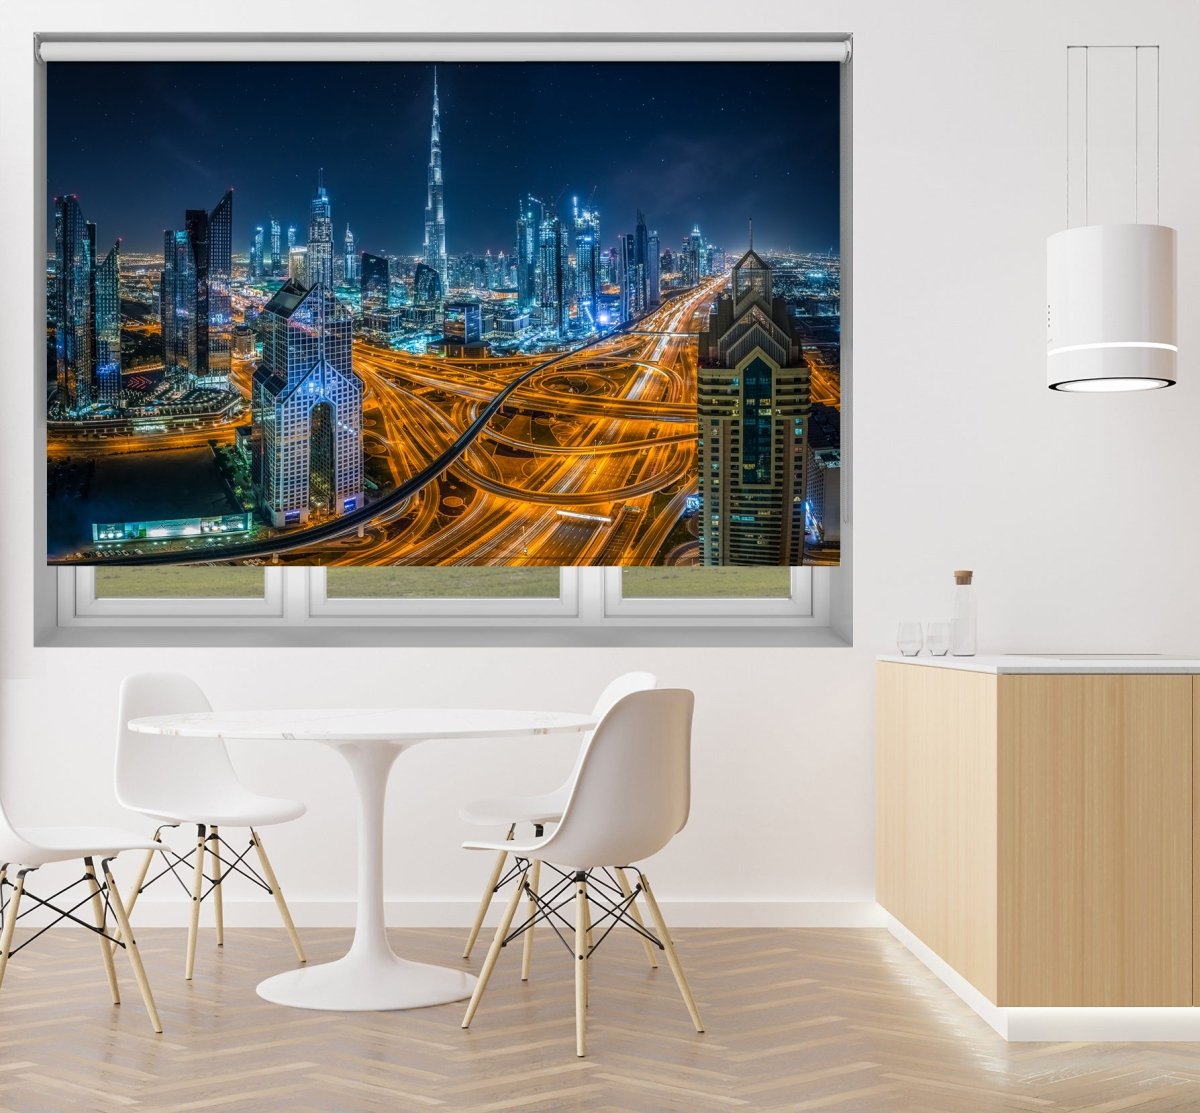 City Lights of Dubai at Night Printed Picture Photo Roller Blind- 1X1888443 - Art Fever - Art Fever